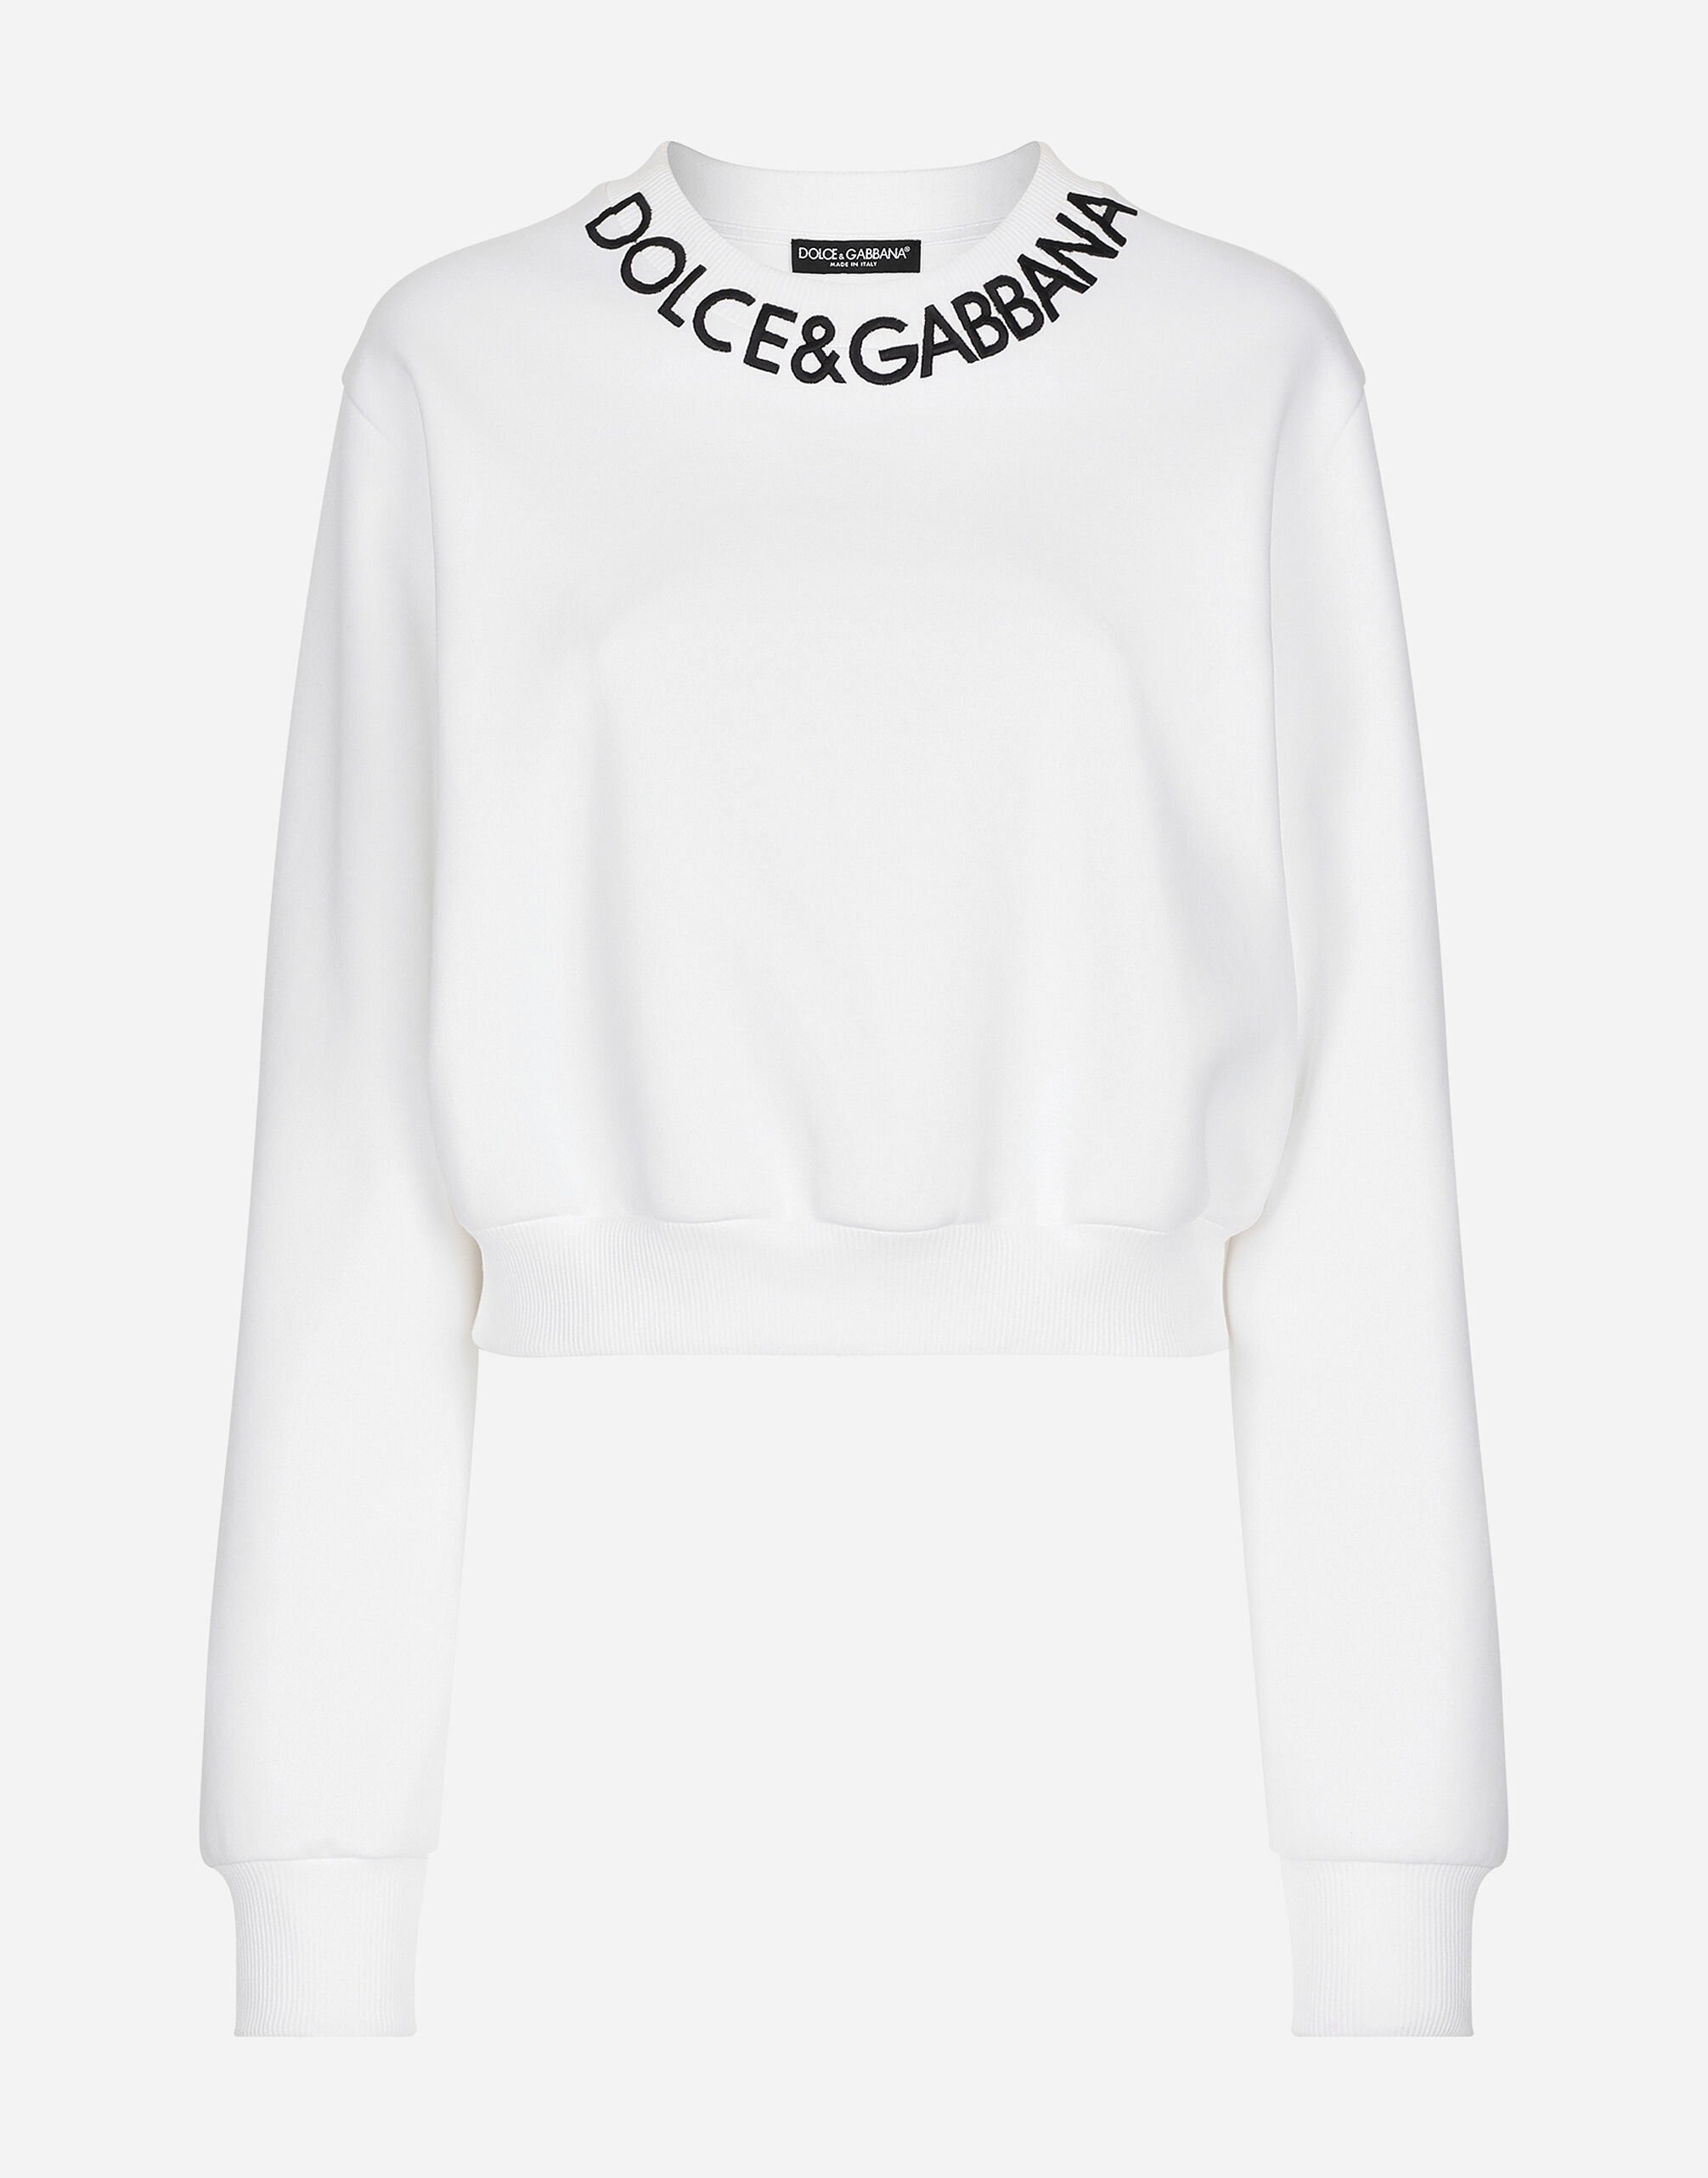 Dolce & Gabbana Cropped jersey sweatshirt with logo embroidery on neck White F9R58ZGDCBG